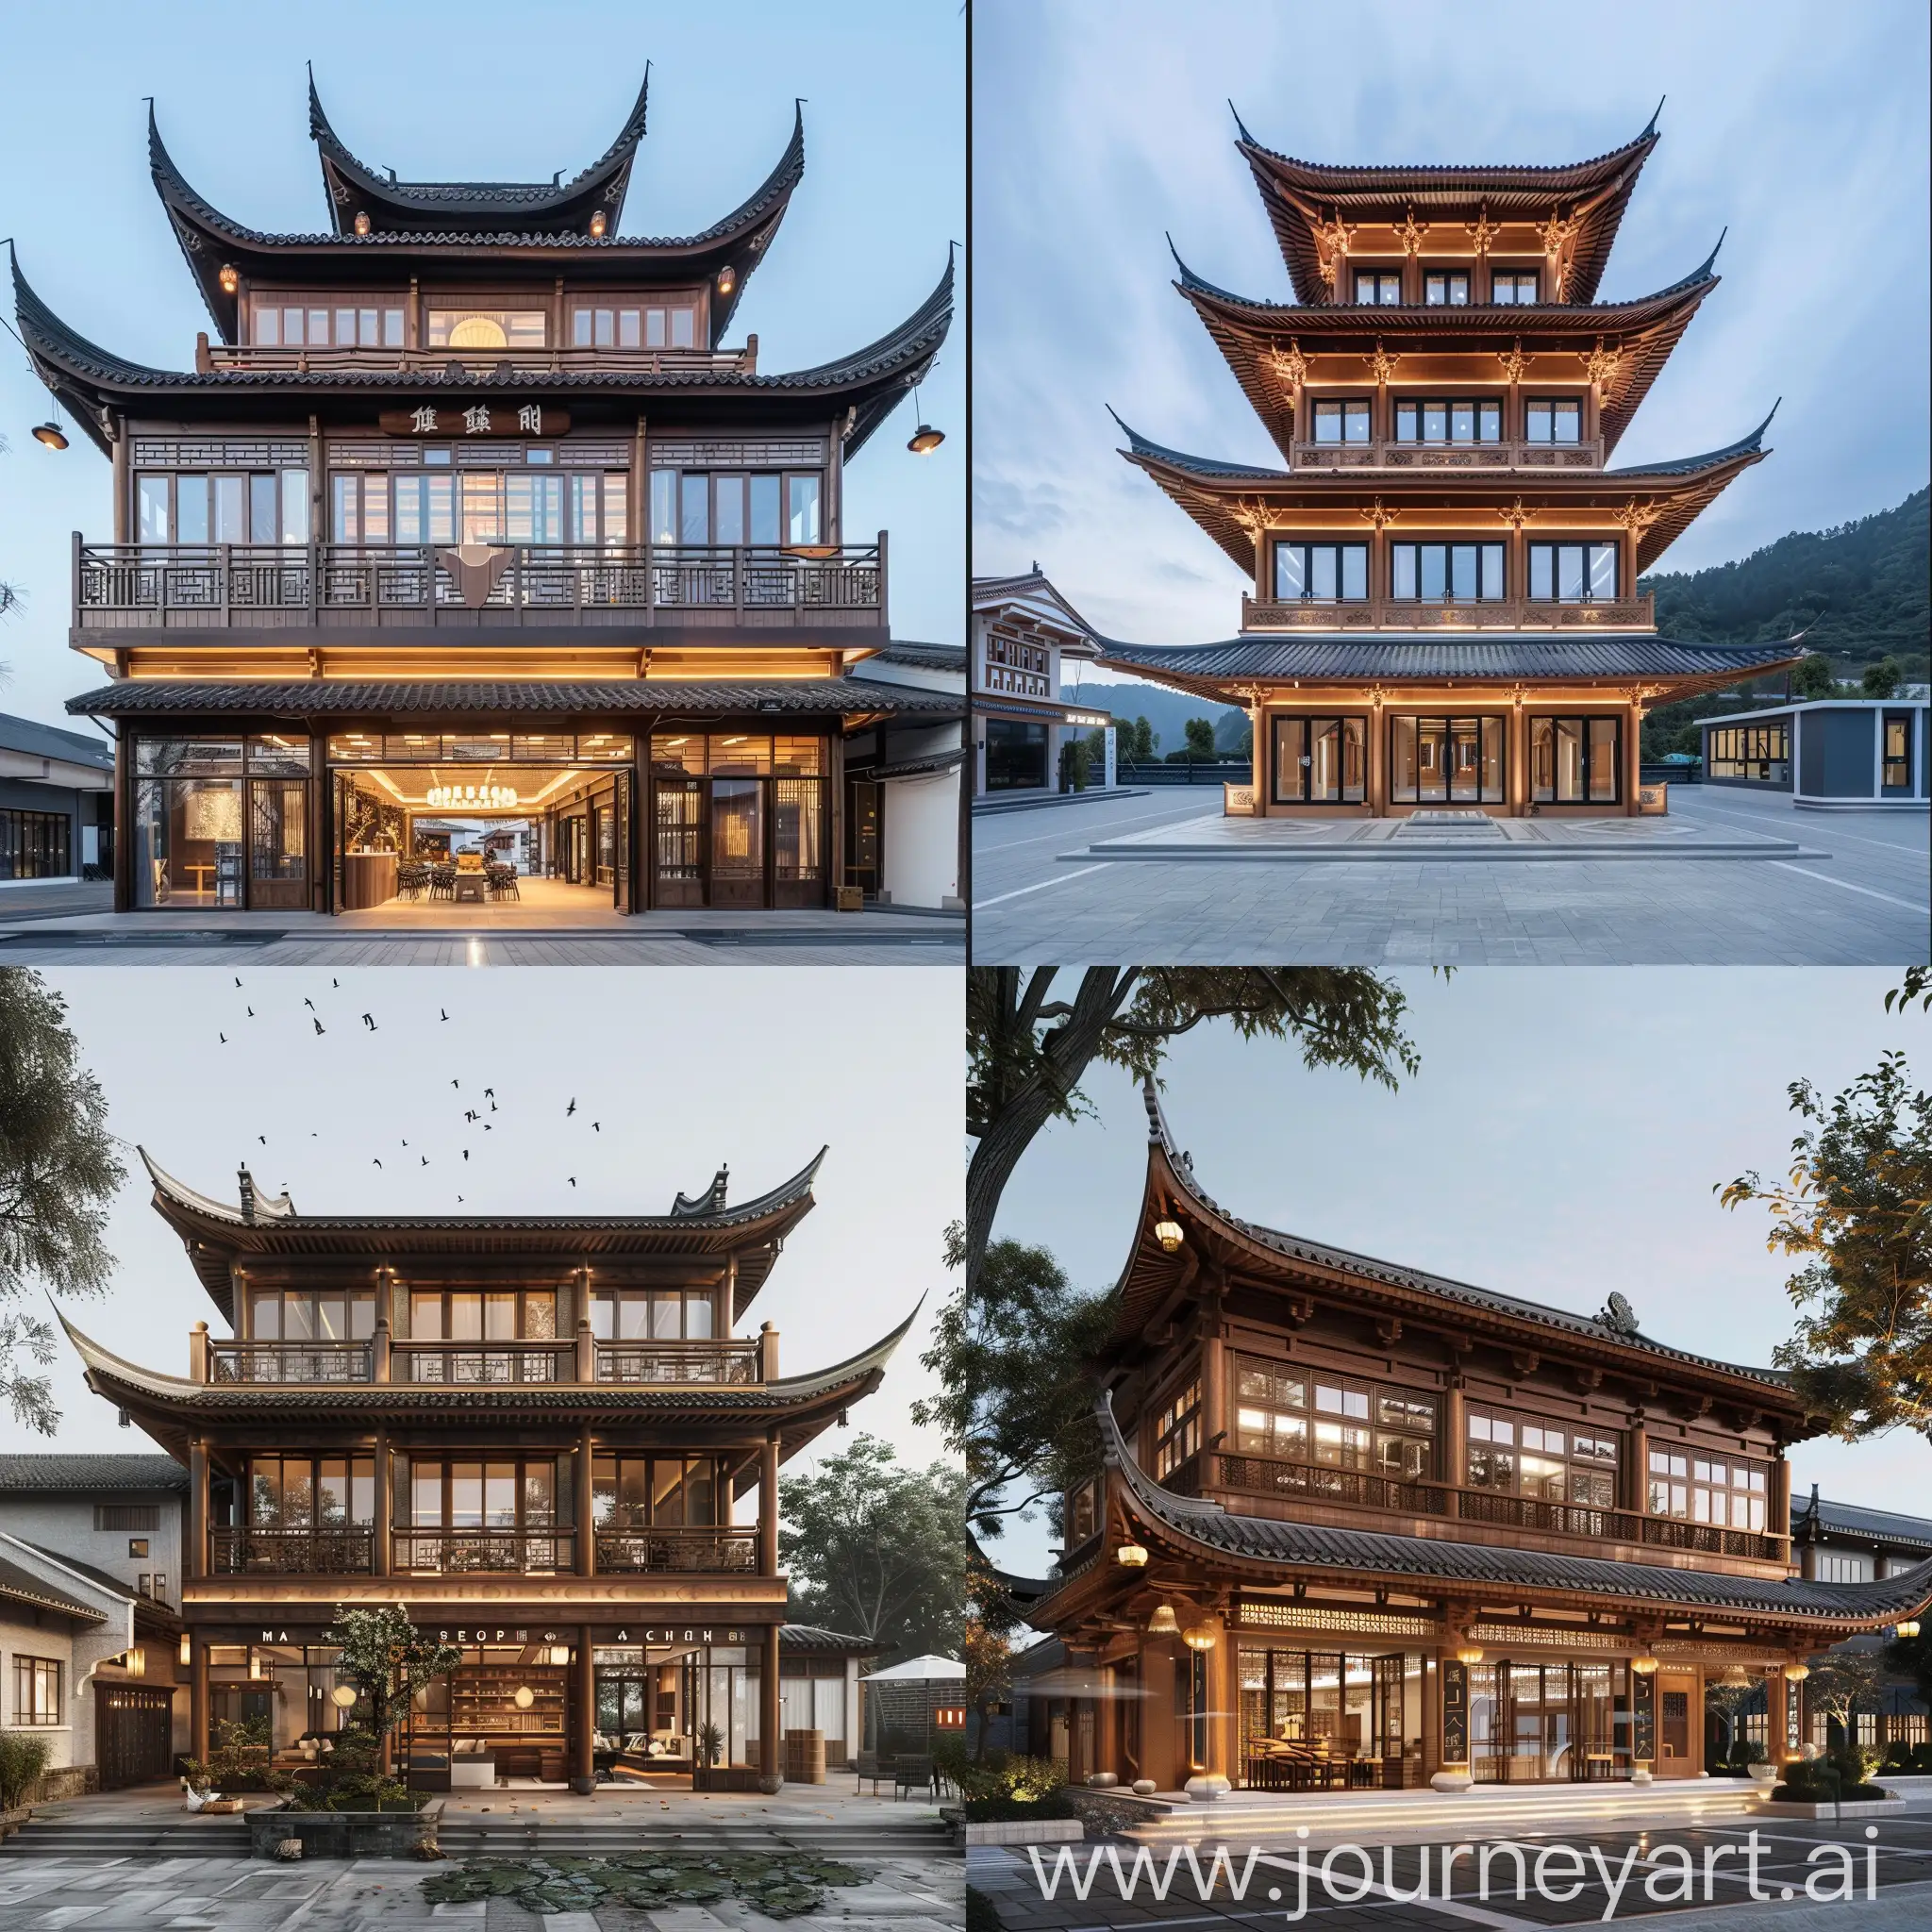 Tujia-Architectural-Style-at-Ma-Chang-ThreeStory-Tourist-Service-Center